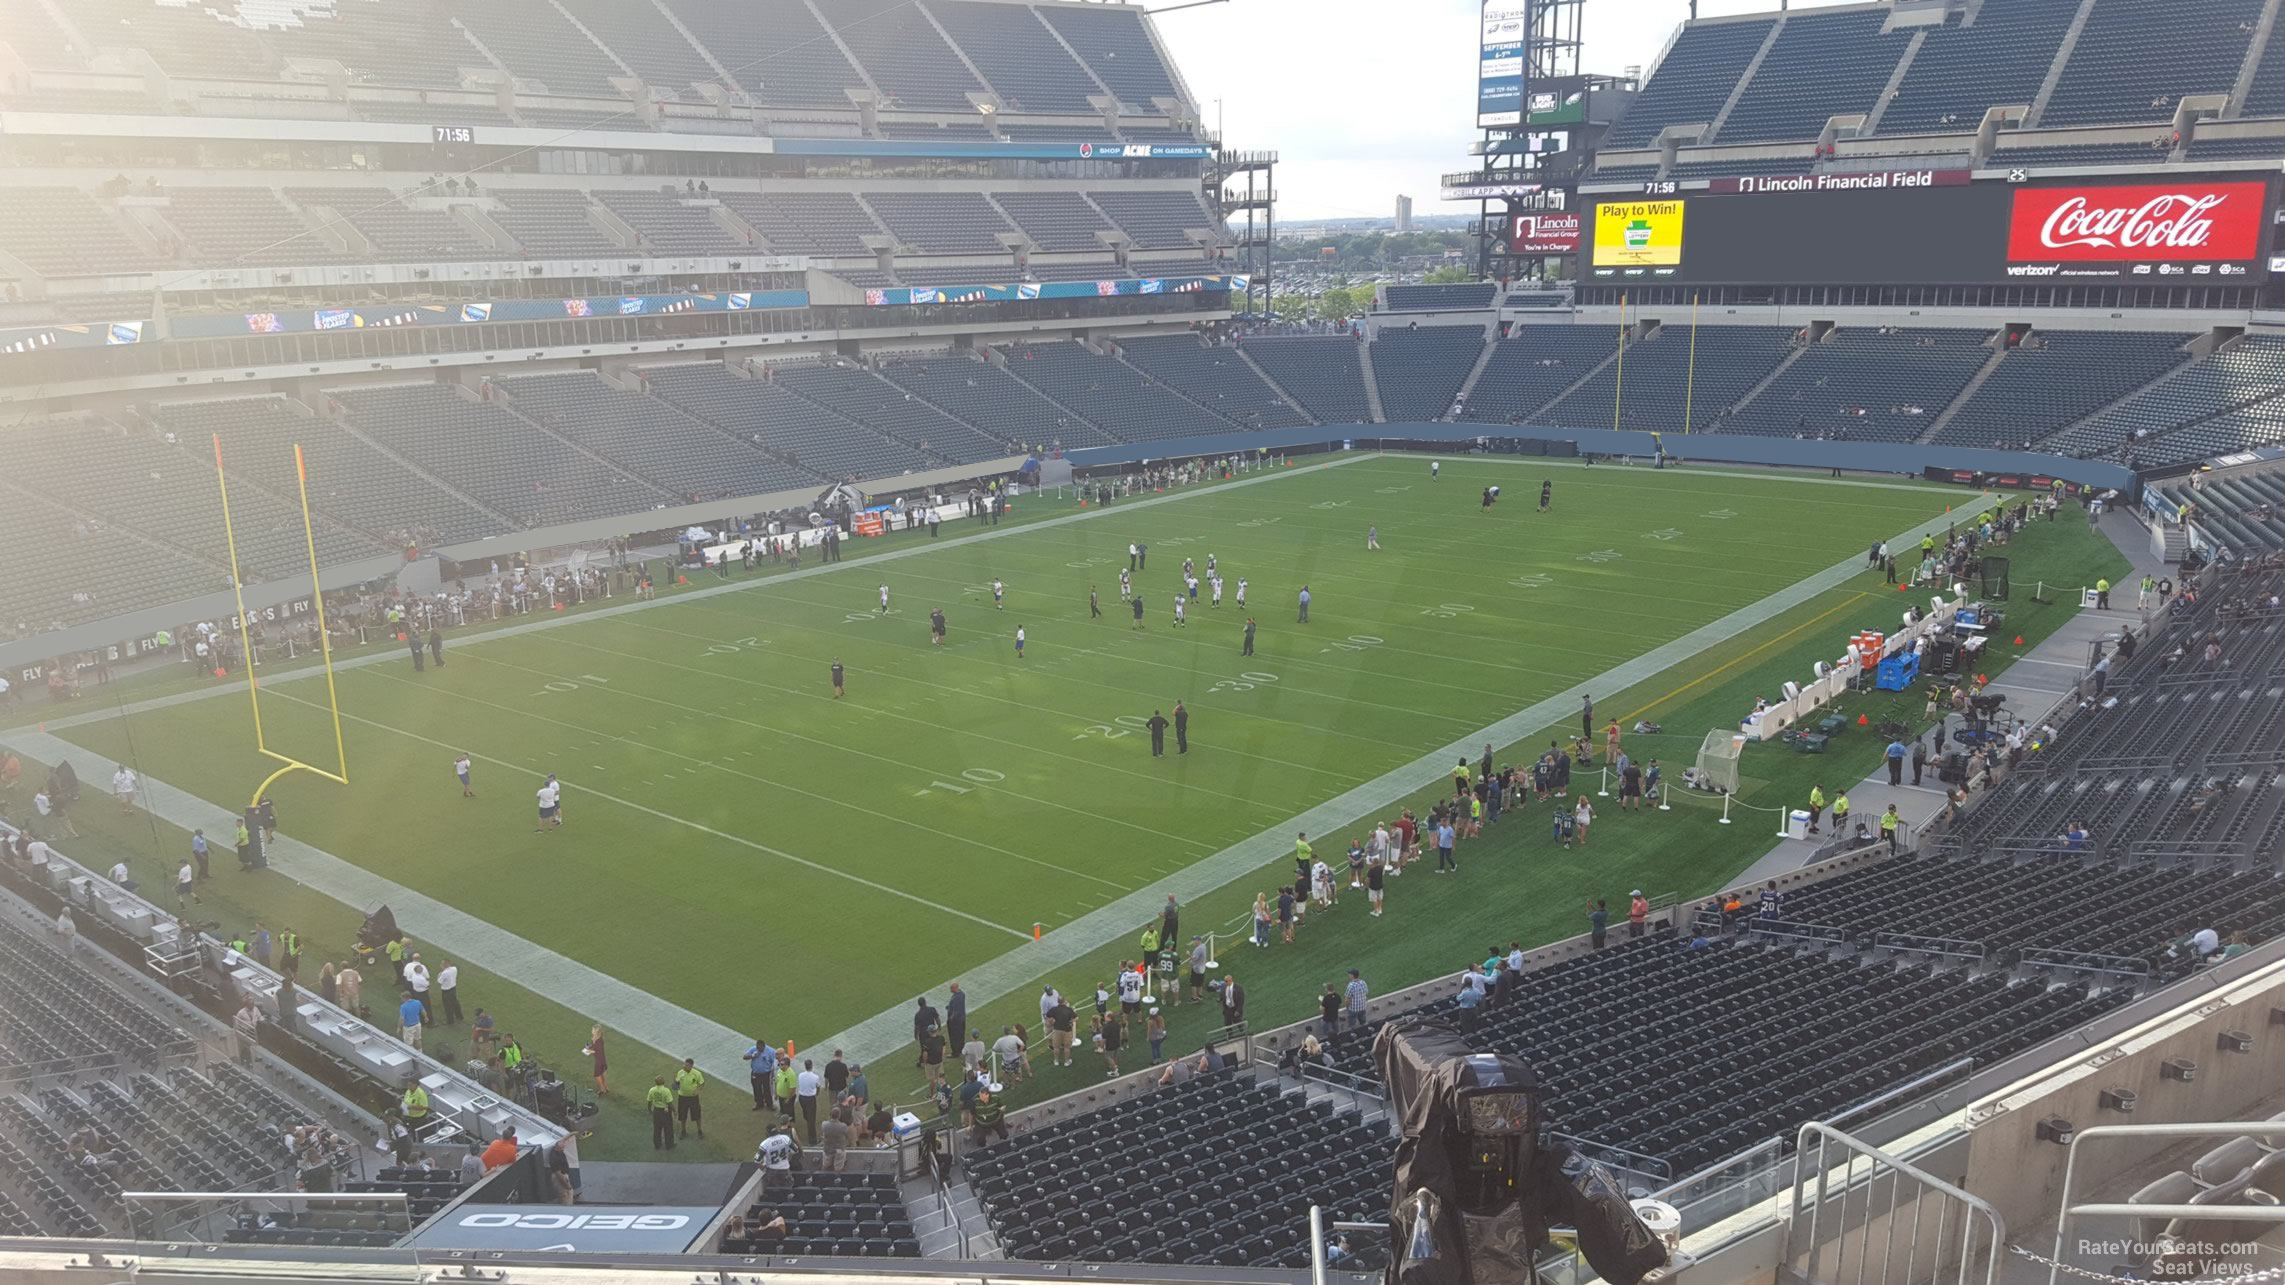 section c15, row 7 seat view  for football - lincoln financial field